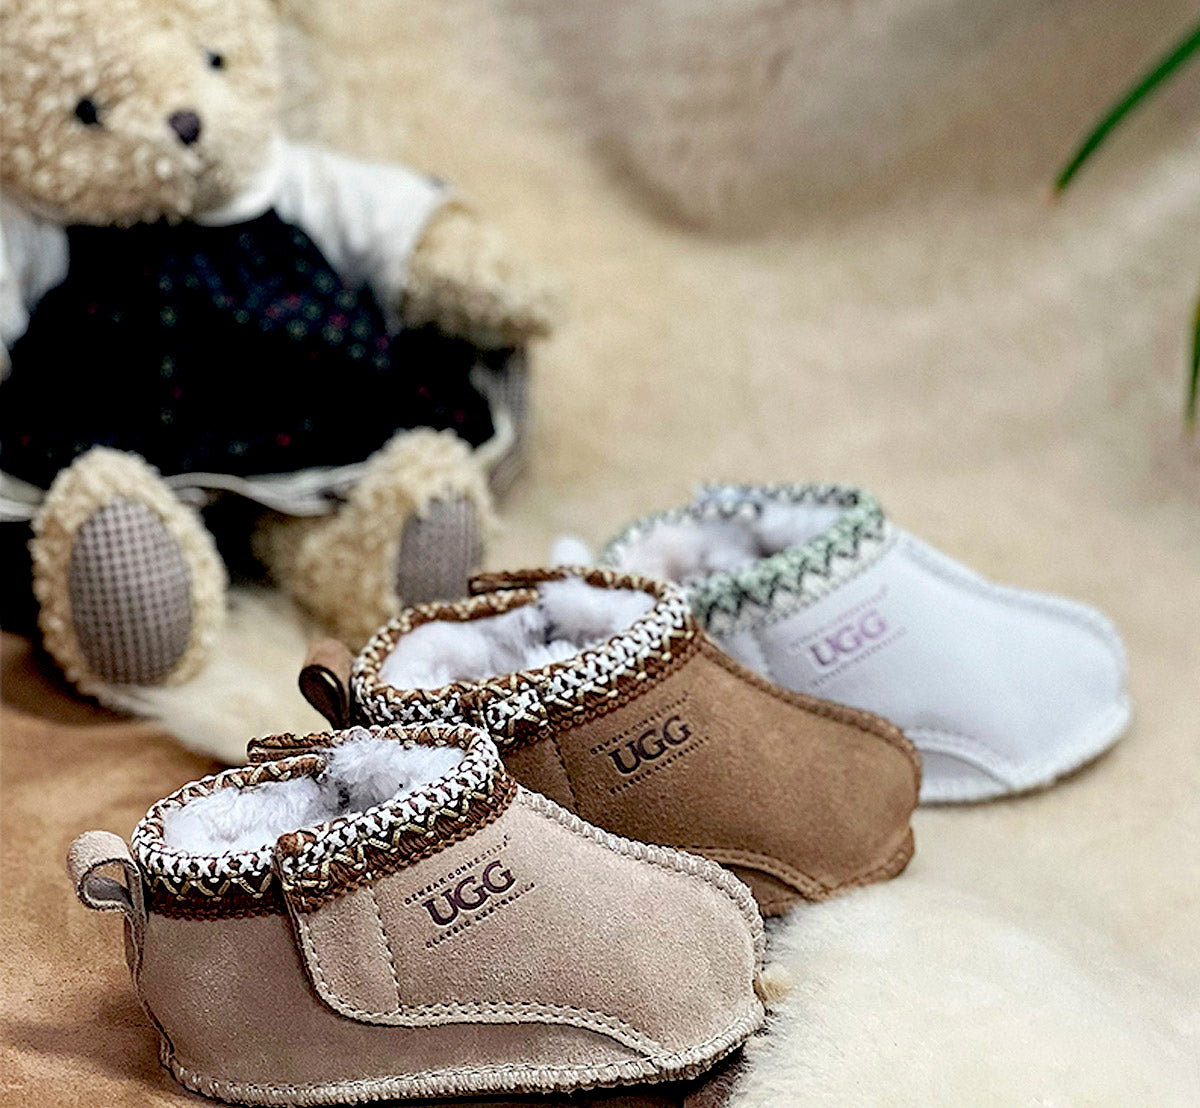 Sheepskin boots for infants are popular gifts